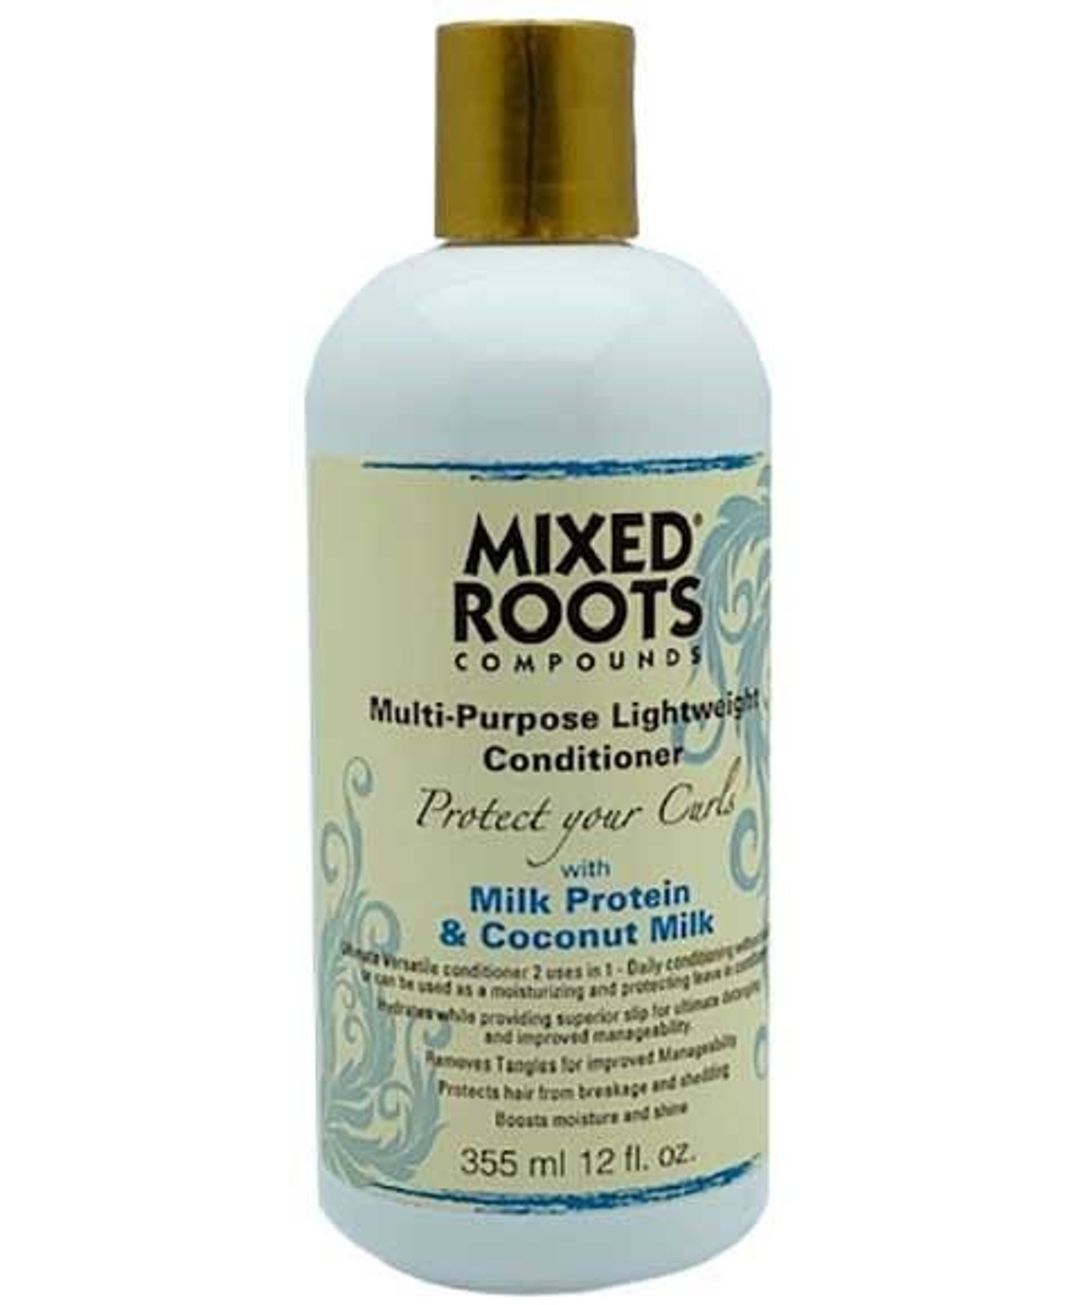 Mixed Roots - Compounds Multi-Purpose Lightweight Conditioner With Milk Protein & Coconut Milk 355ml